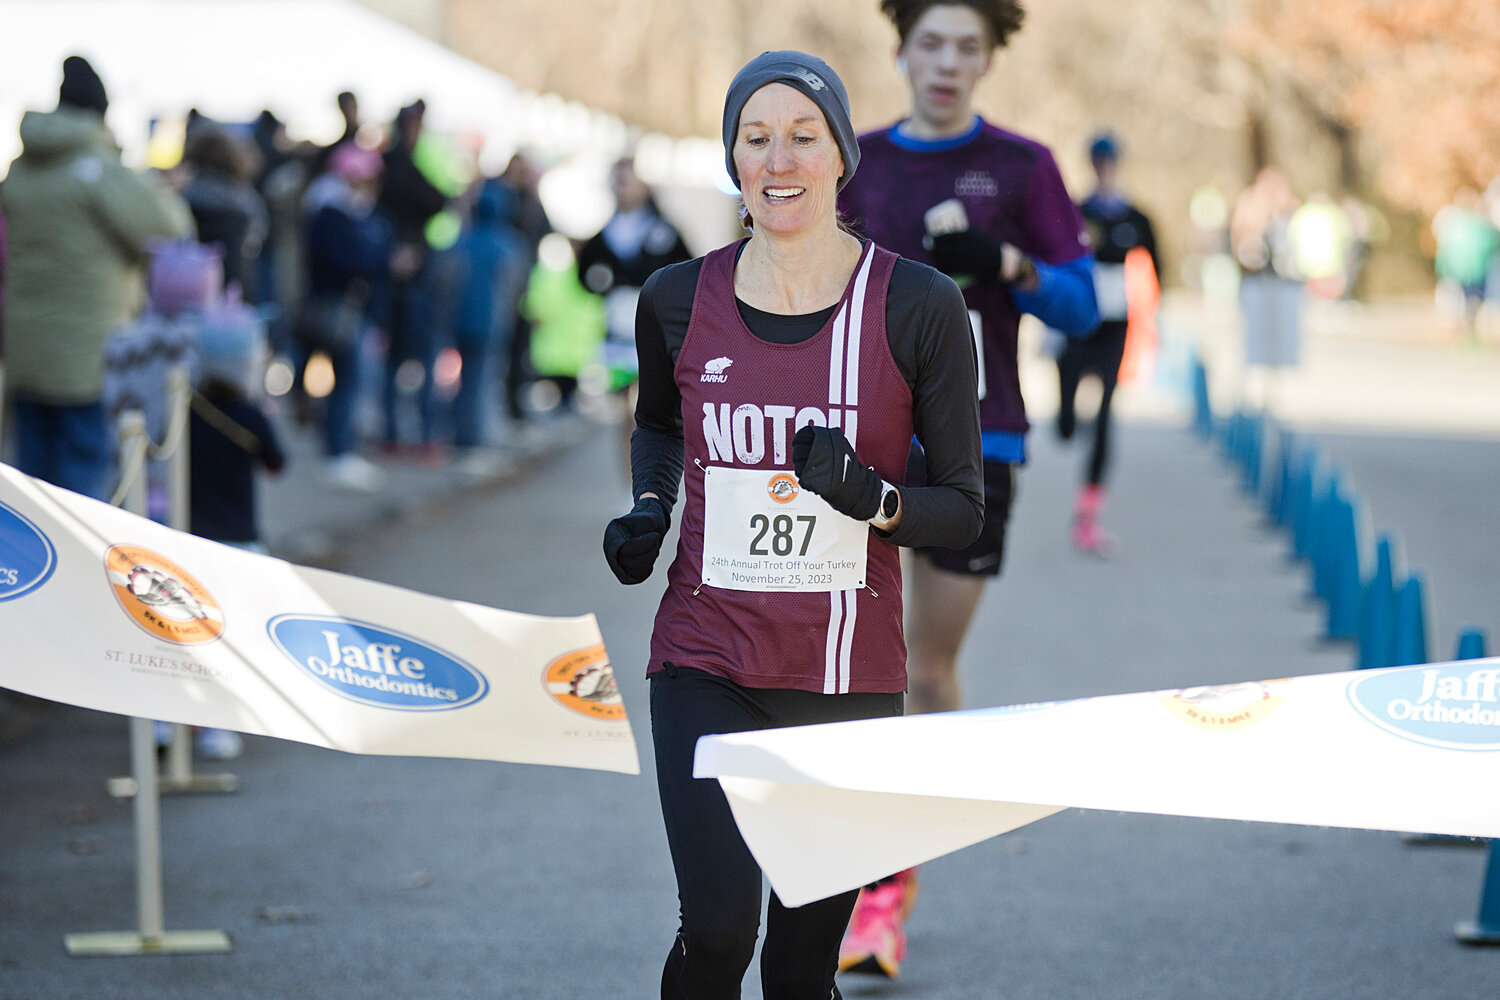 Top female finisher, Brett Ely, runs through the finish line of the Trot Off Your Turkey 5K, with a time of 18:54.